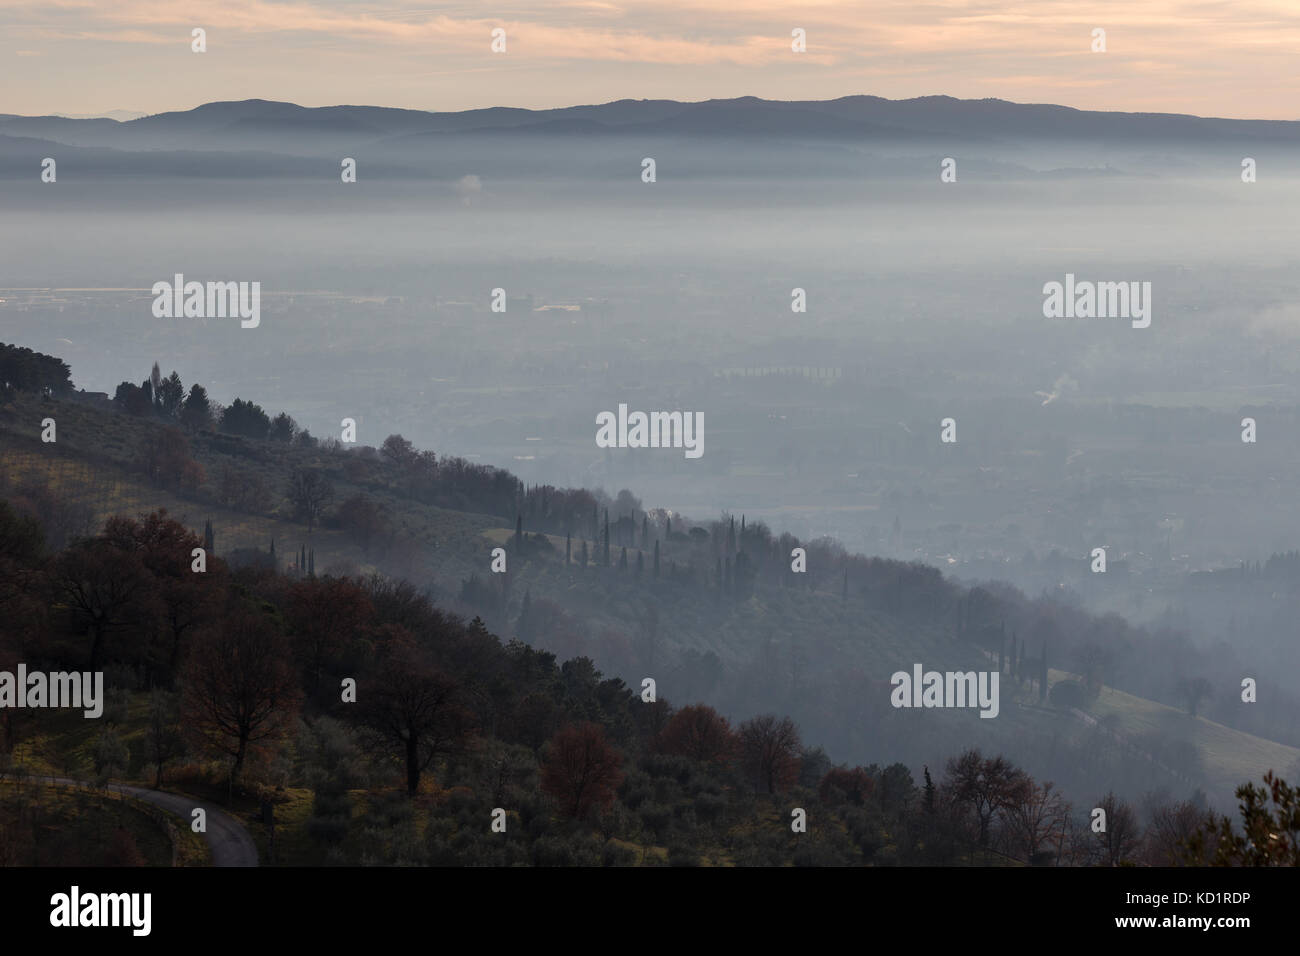 A valley filled by mist at sunset, with hills and trees in the foreground Stock Photo